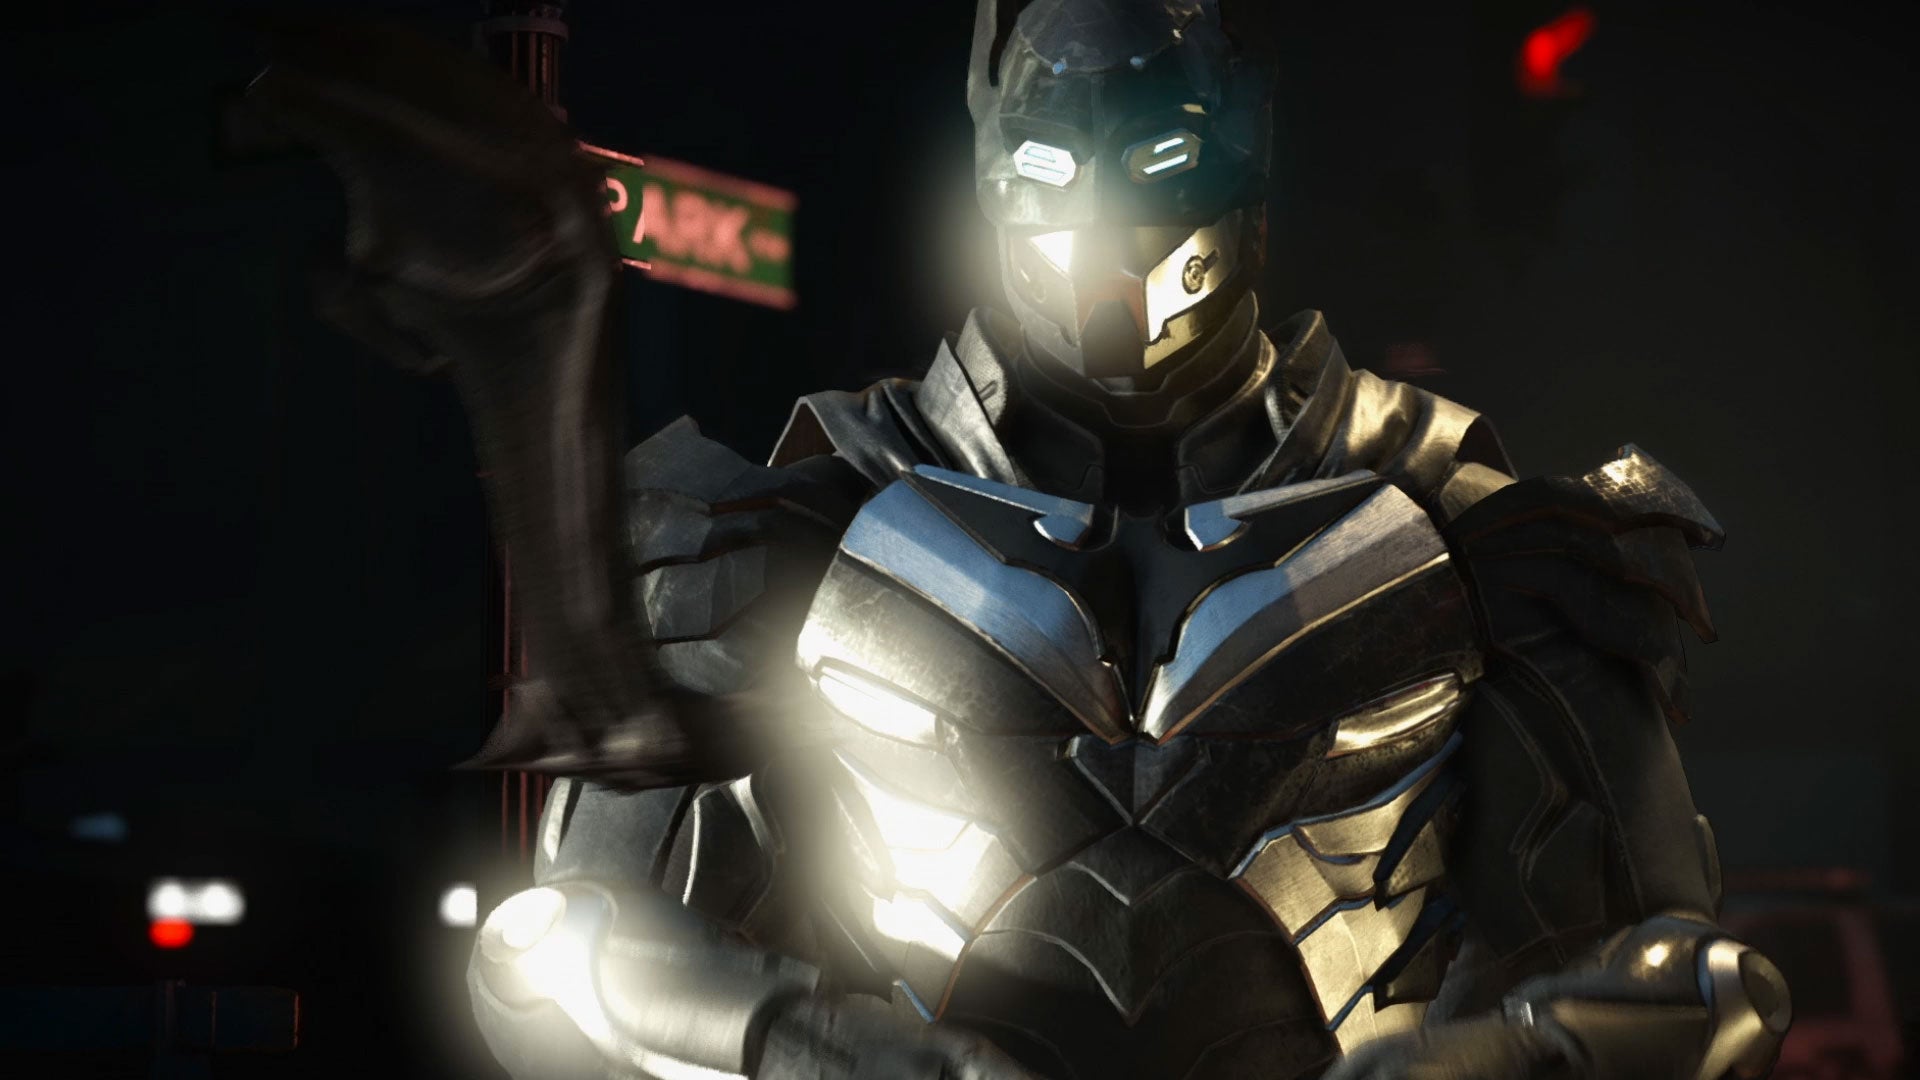 Image for Injustice 2 video shows off gear system, gets the thumbs up for letting you play dress ups